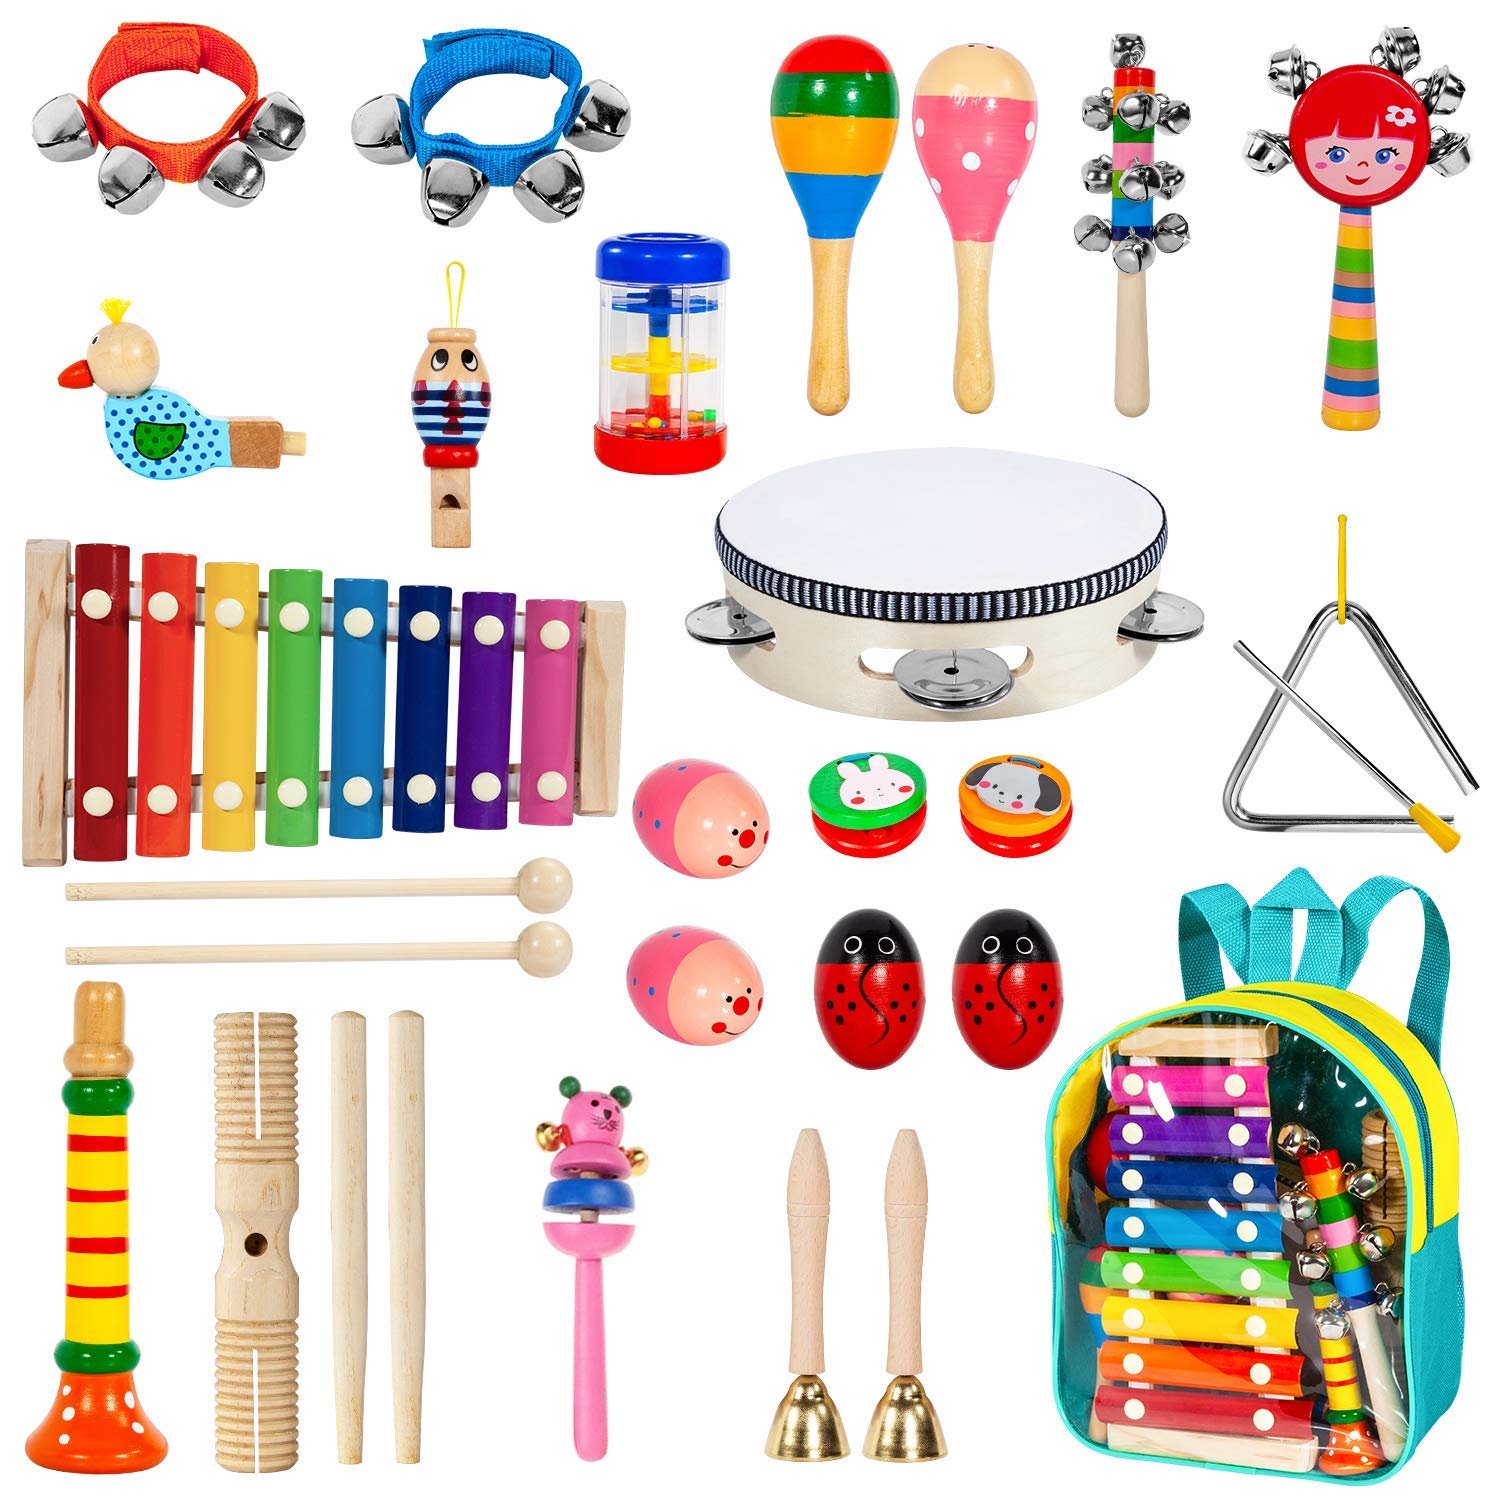 toy musical instruments for toddlers